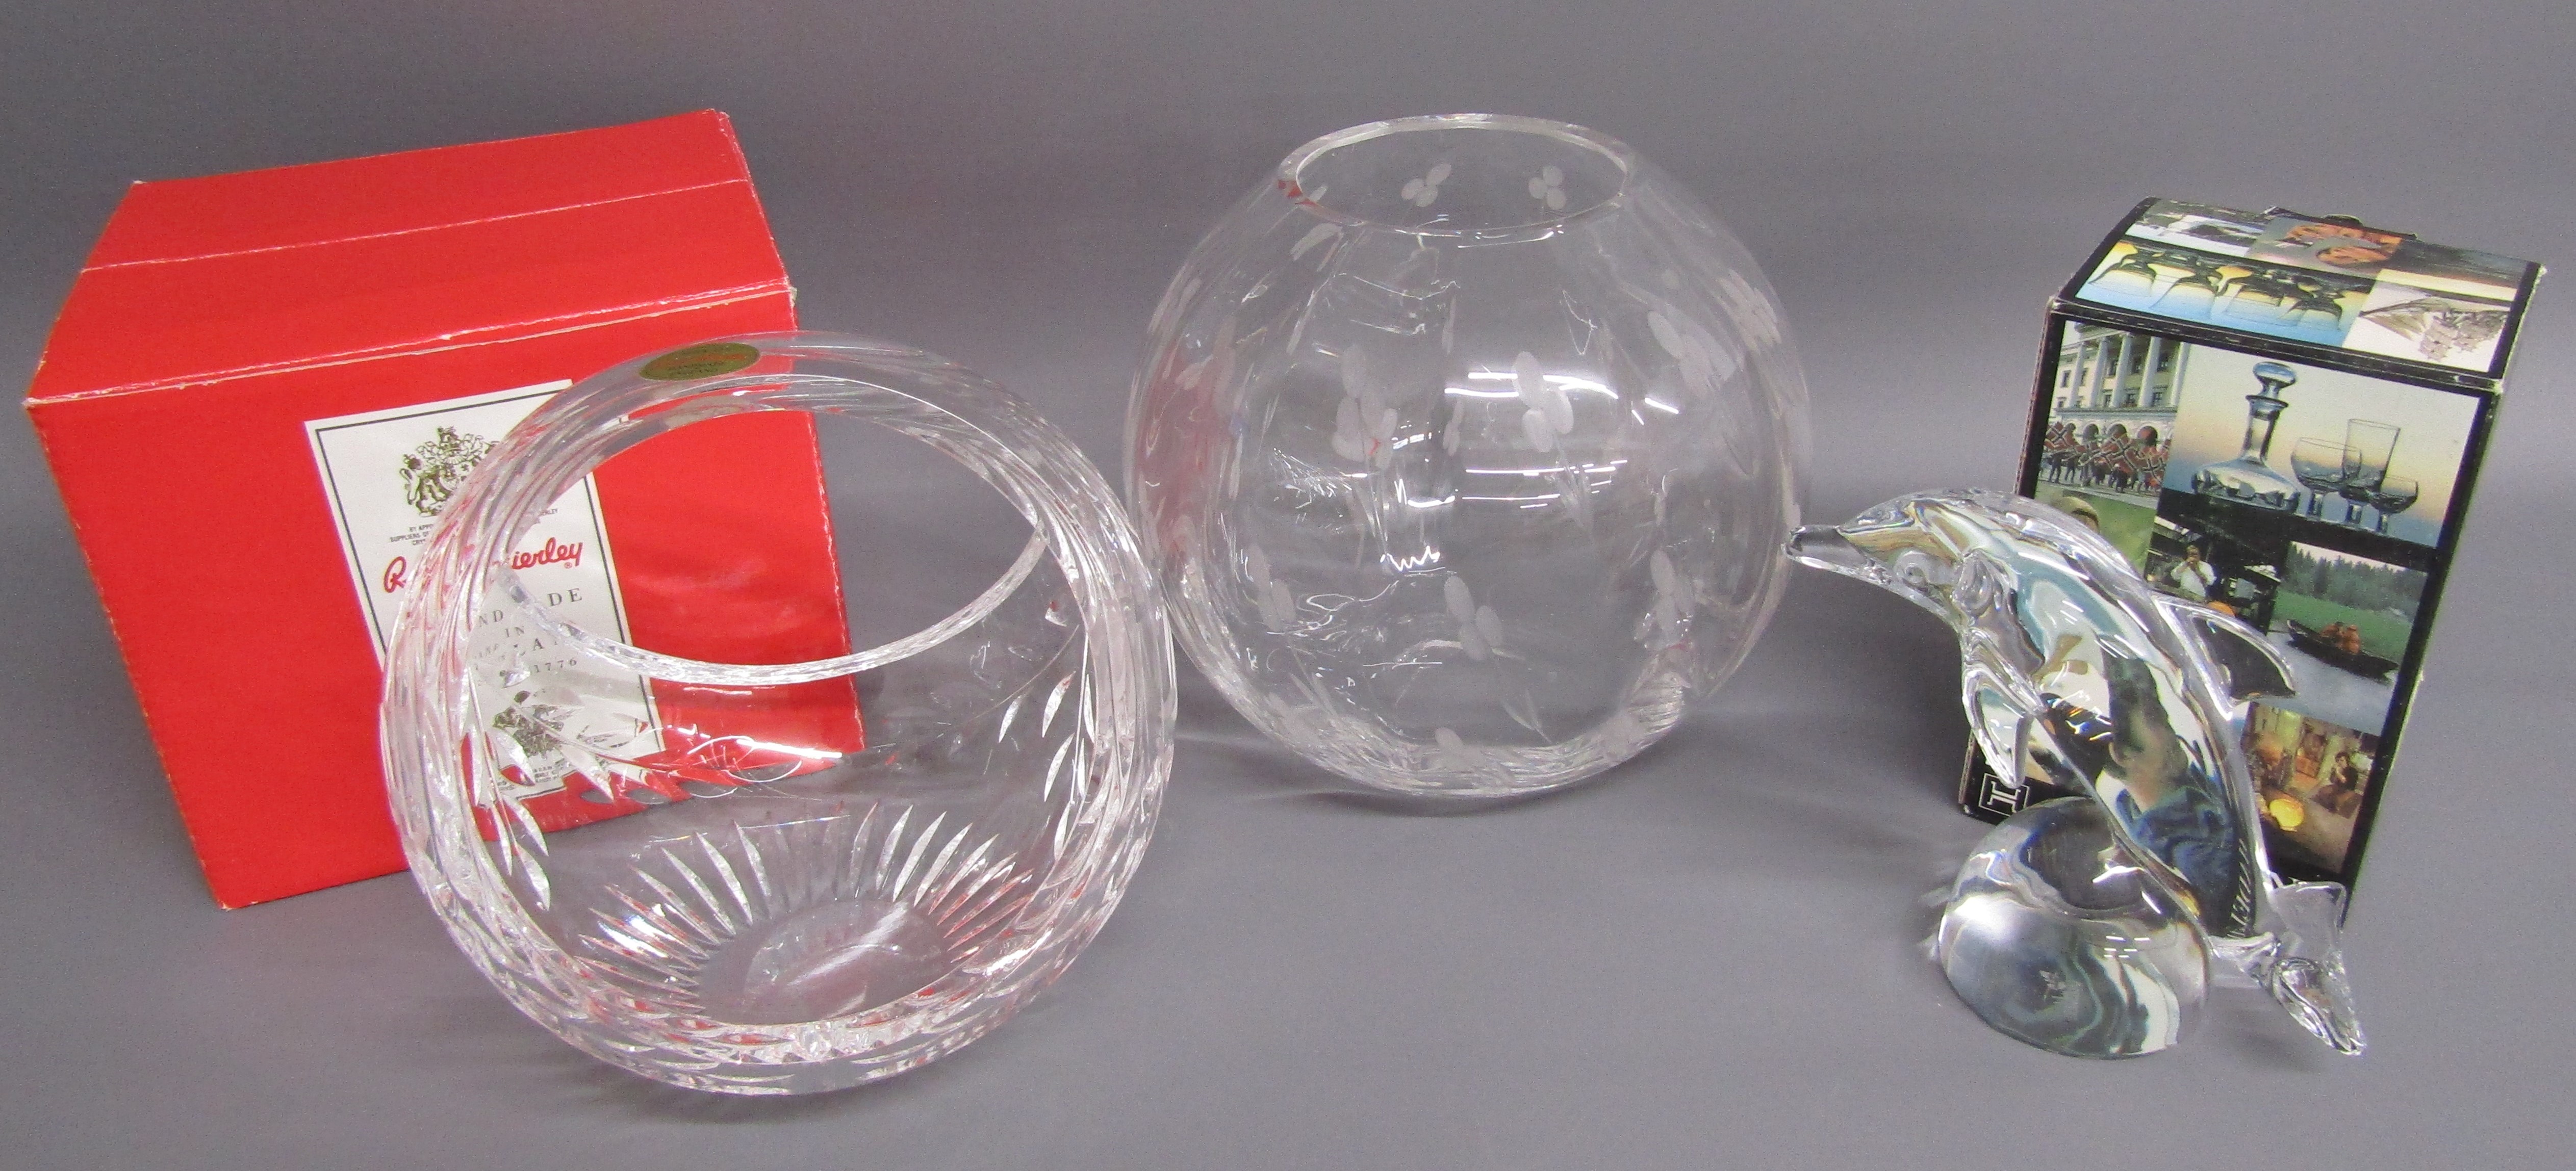 Royal Brierley crystal basket dish, Hadeland dolphin figure and bowl with etched flowers